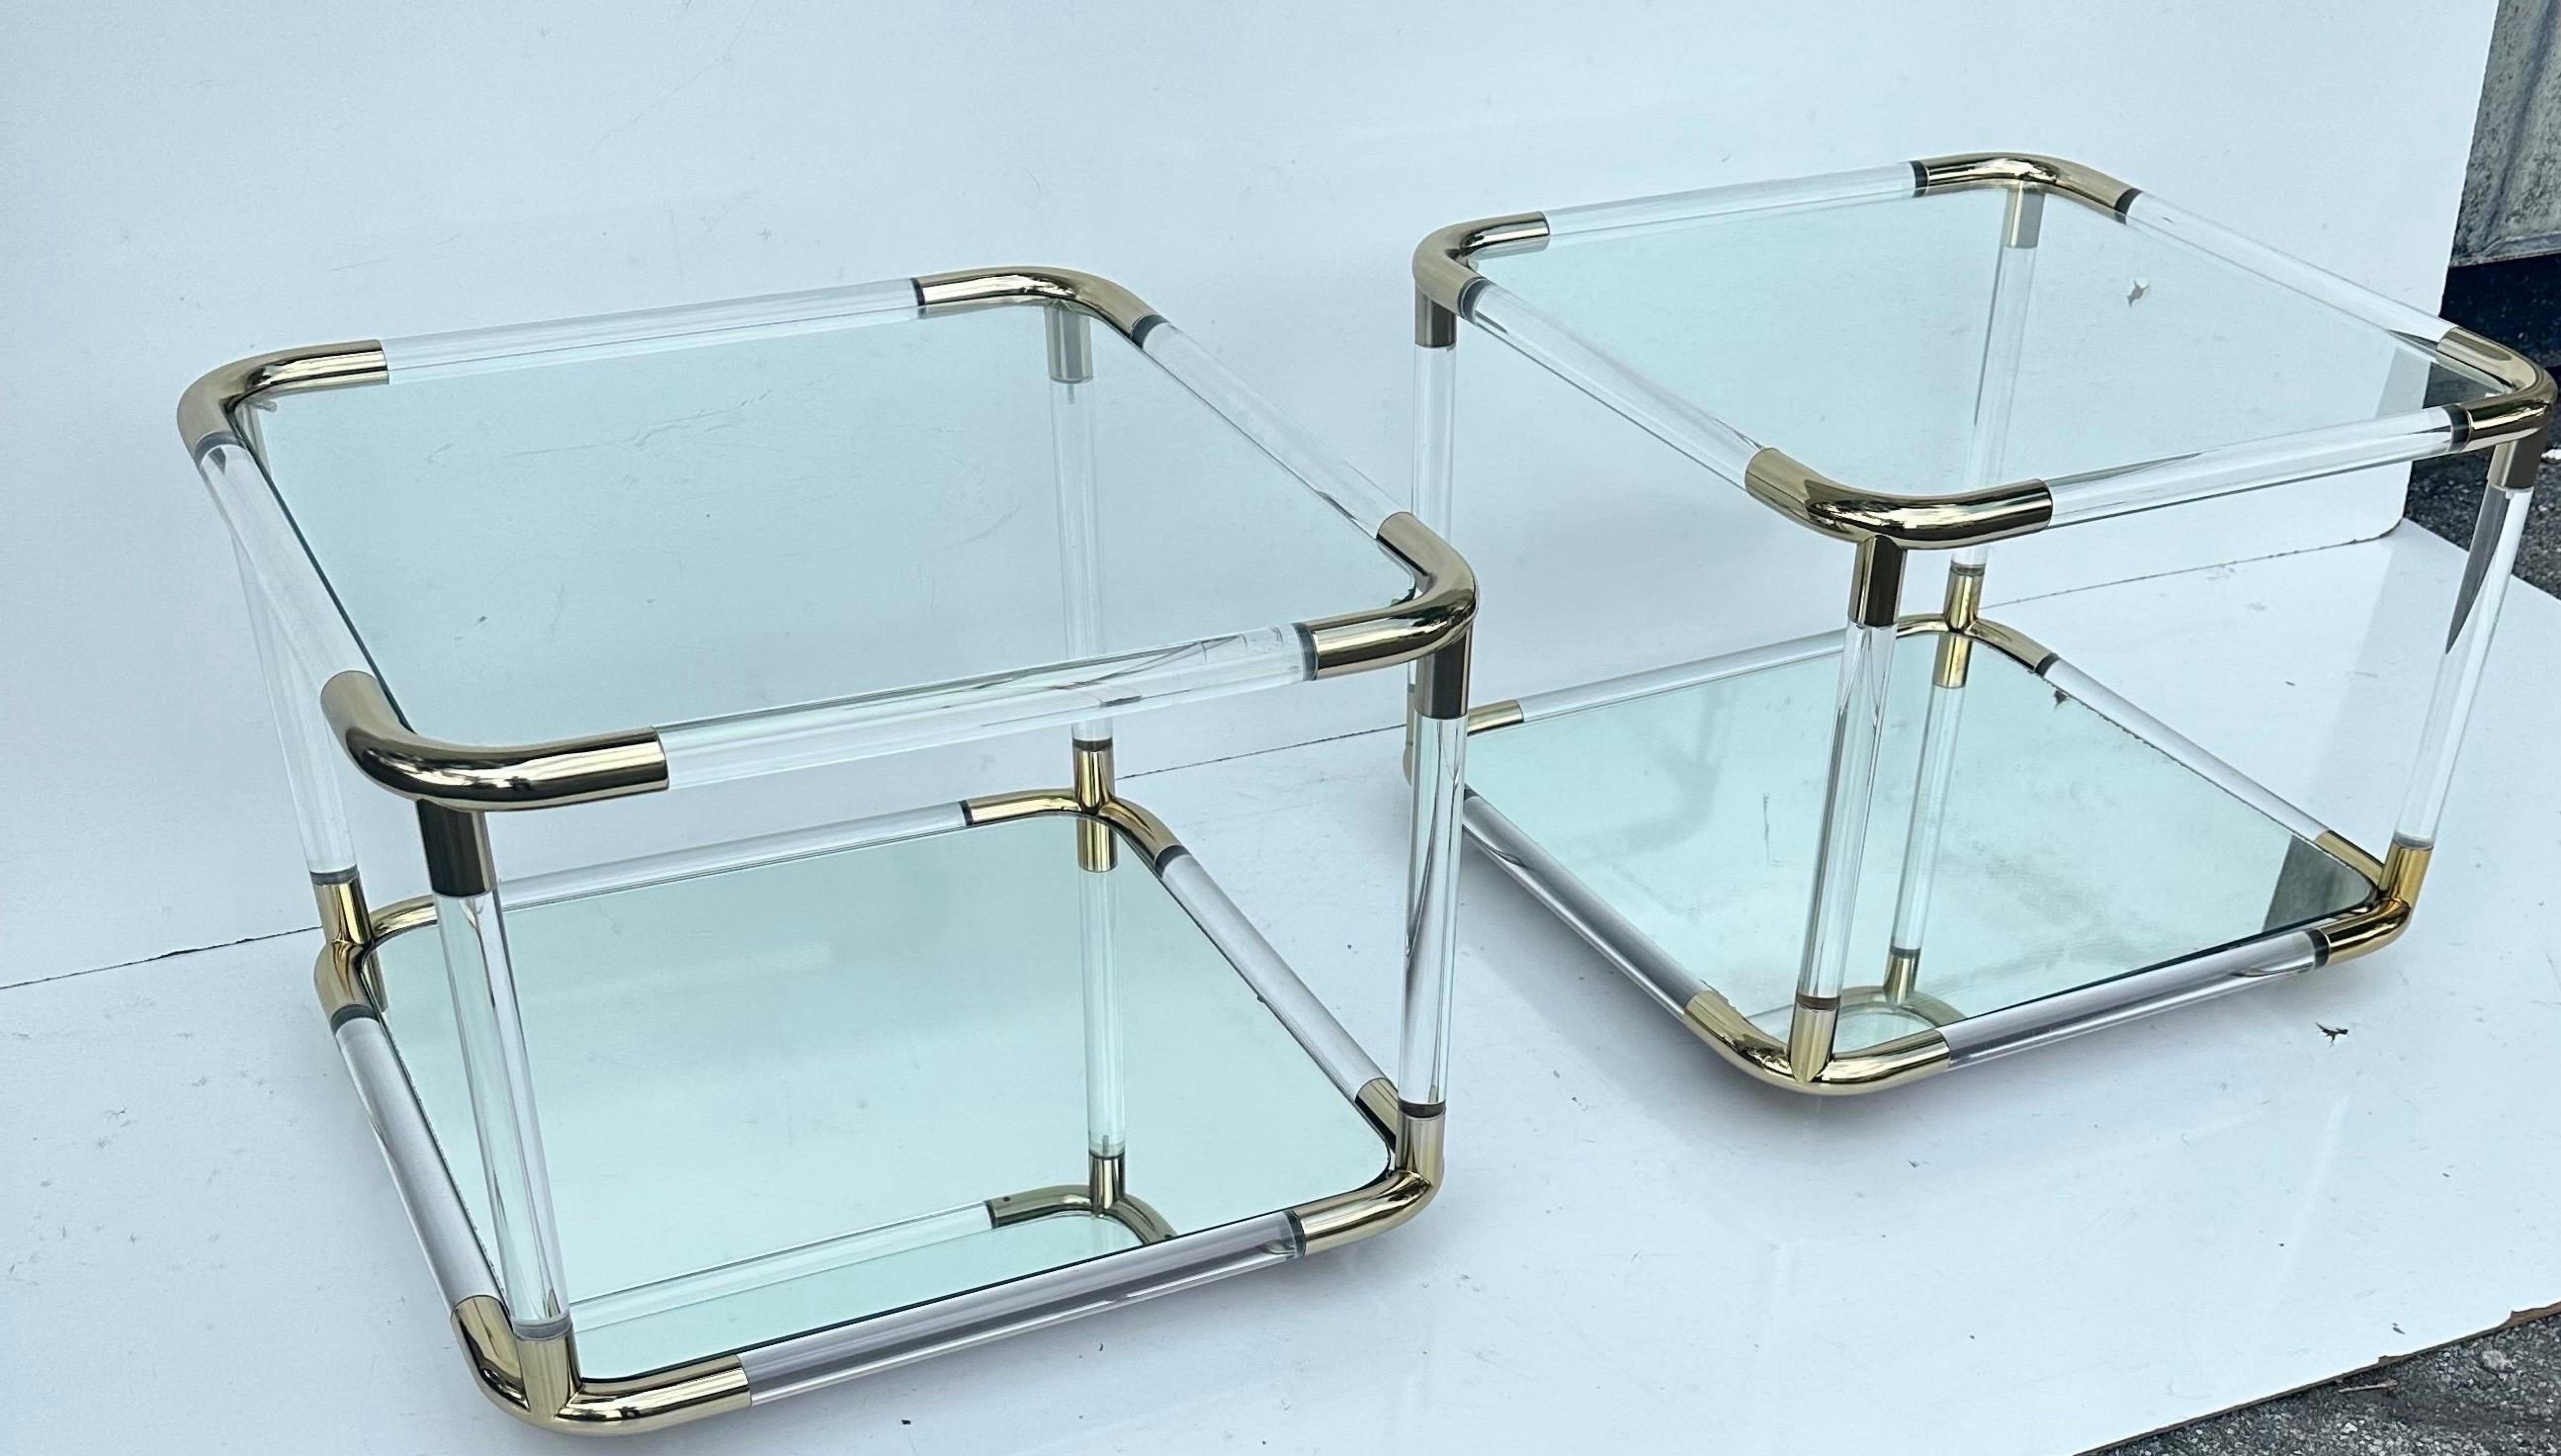 Pair of Charles Hollis Jones lucite and brass side table , bottom glass is a mirror.
Recently restored.
Very good condition.